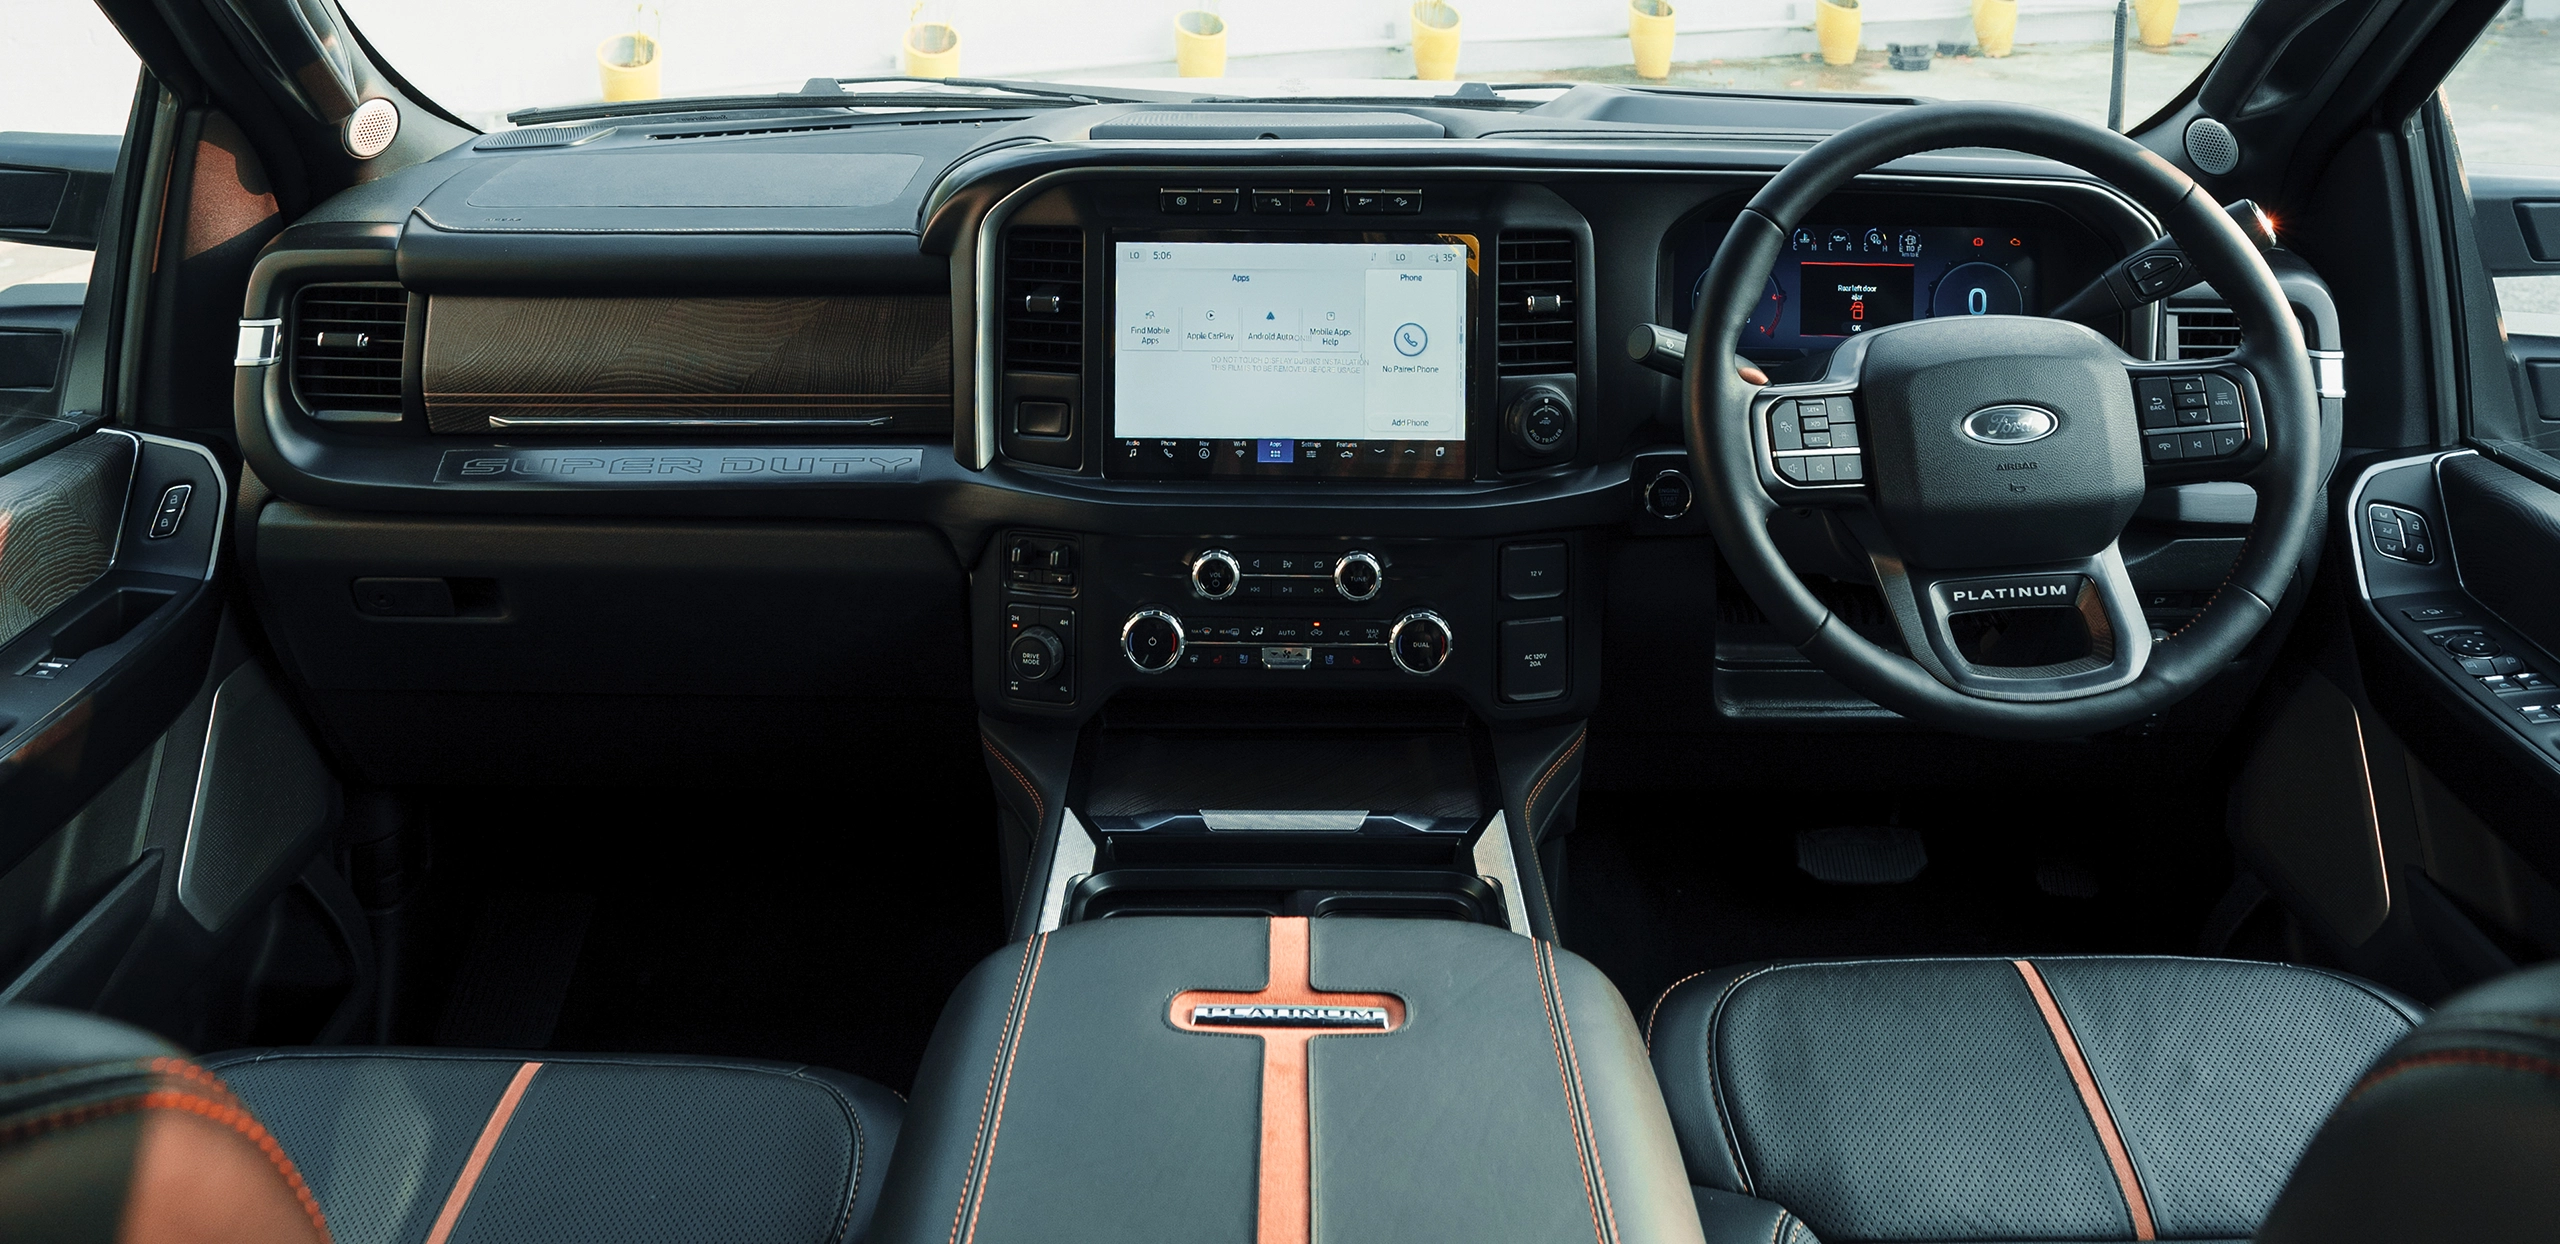 Ford Super Duty interior showing dashboard and steering wheel.